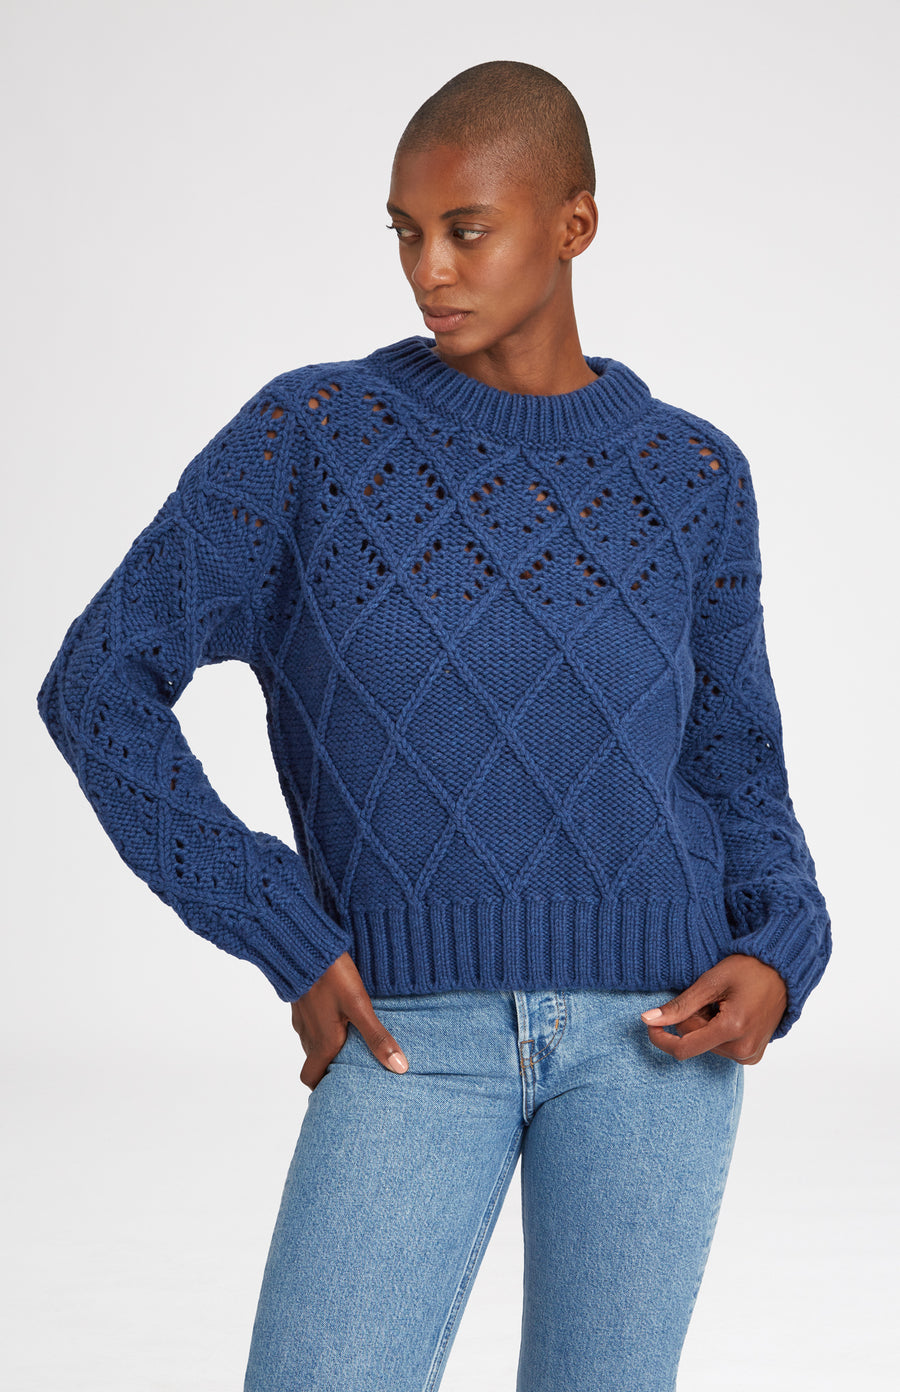 Women's Jumper with allover diamond pattern in Storm Blue on model - Pringle of Scotland